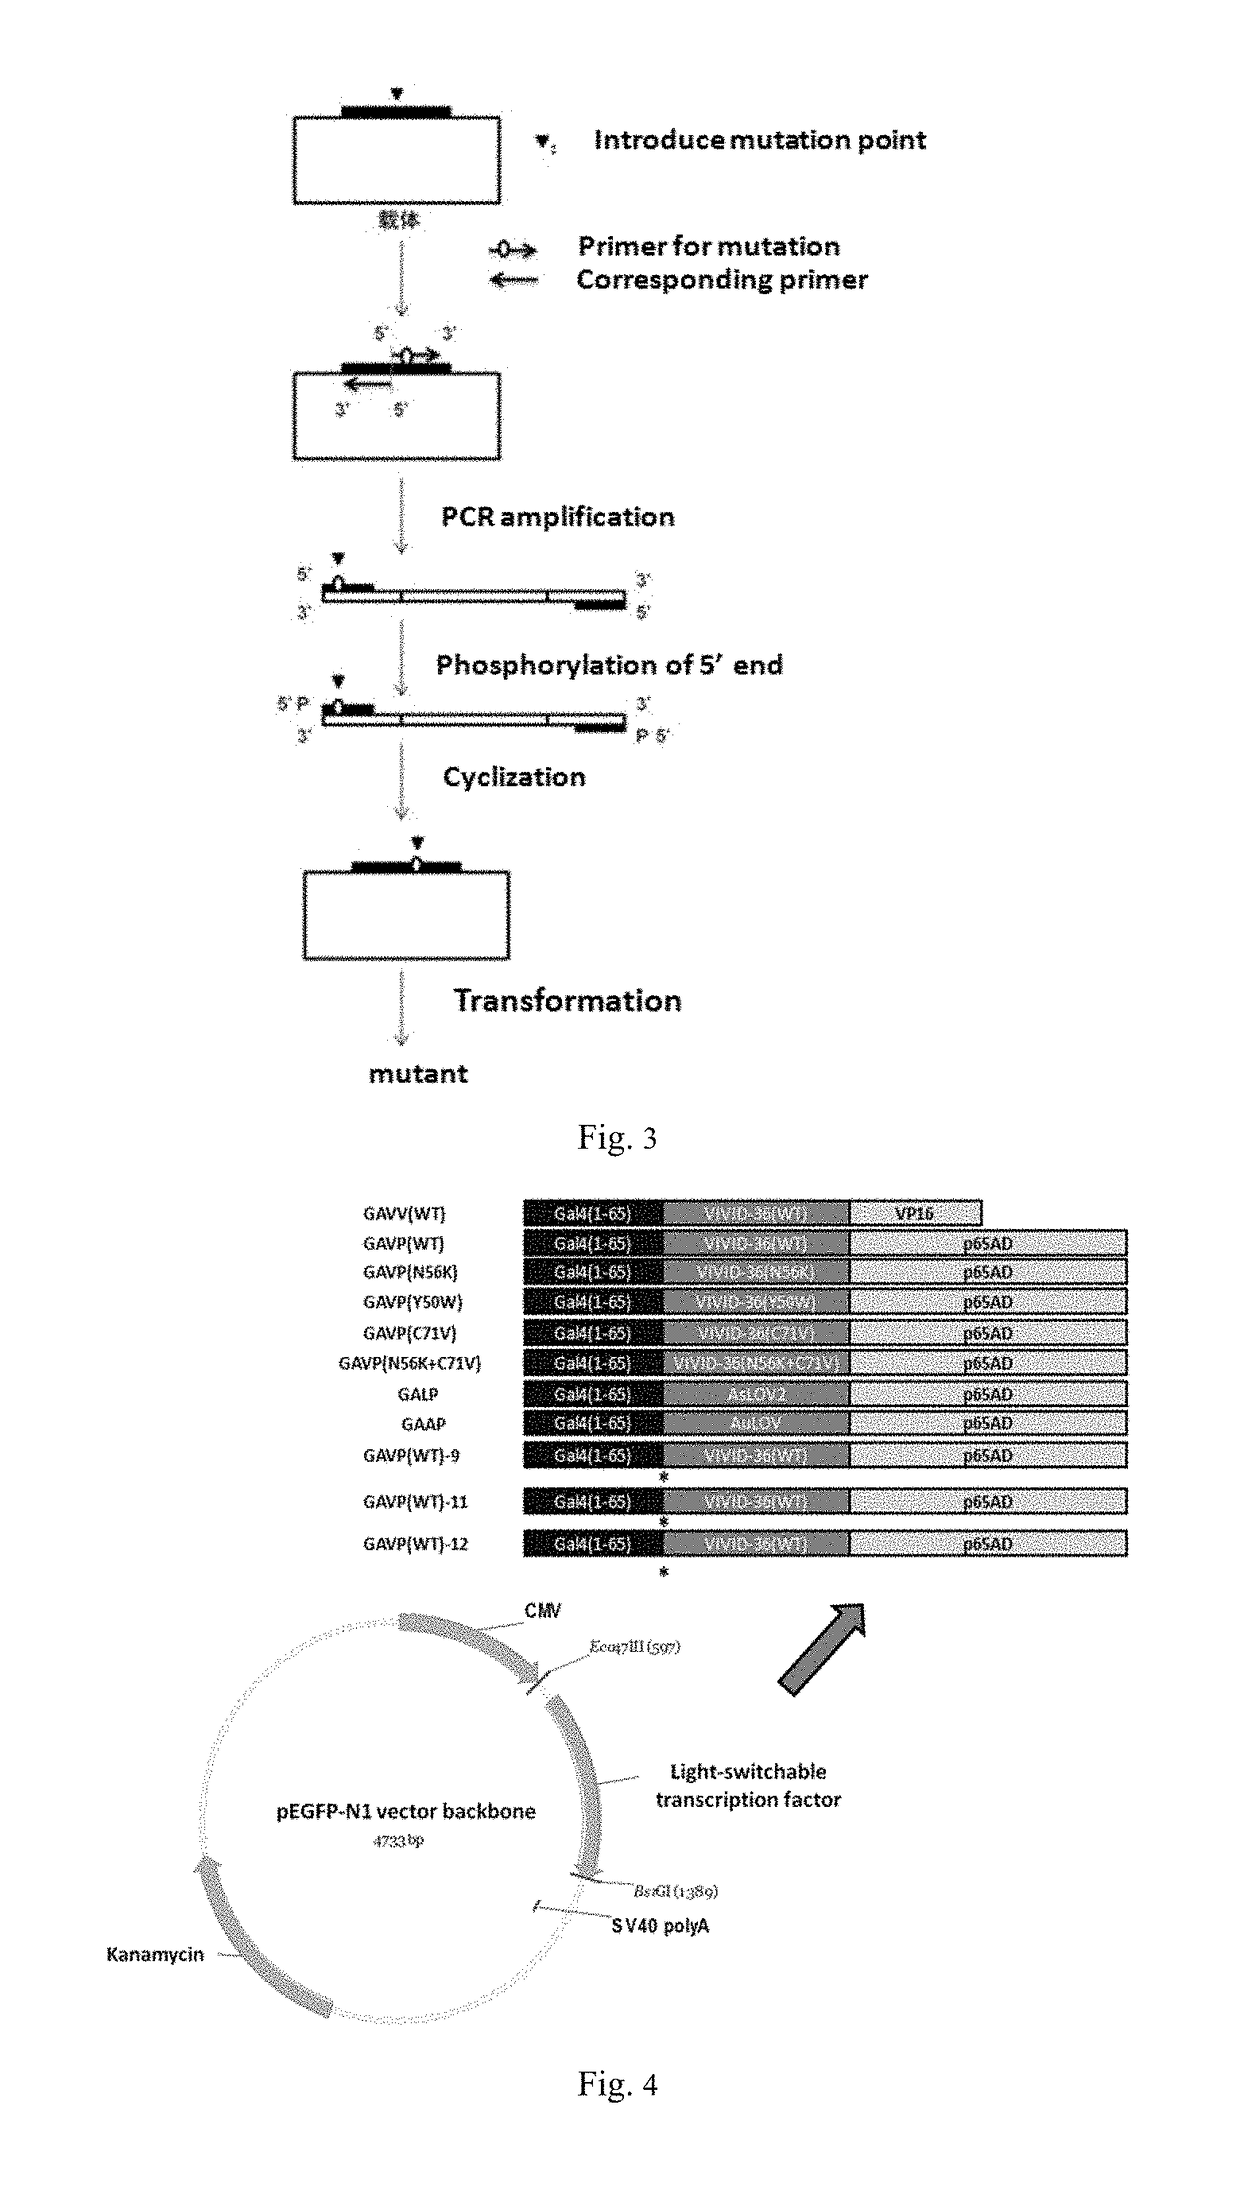 Light-switchable gene expression system